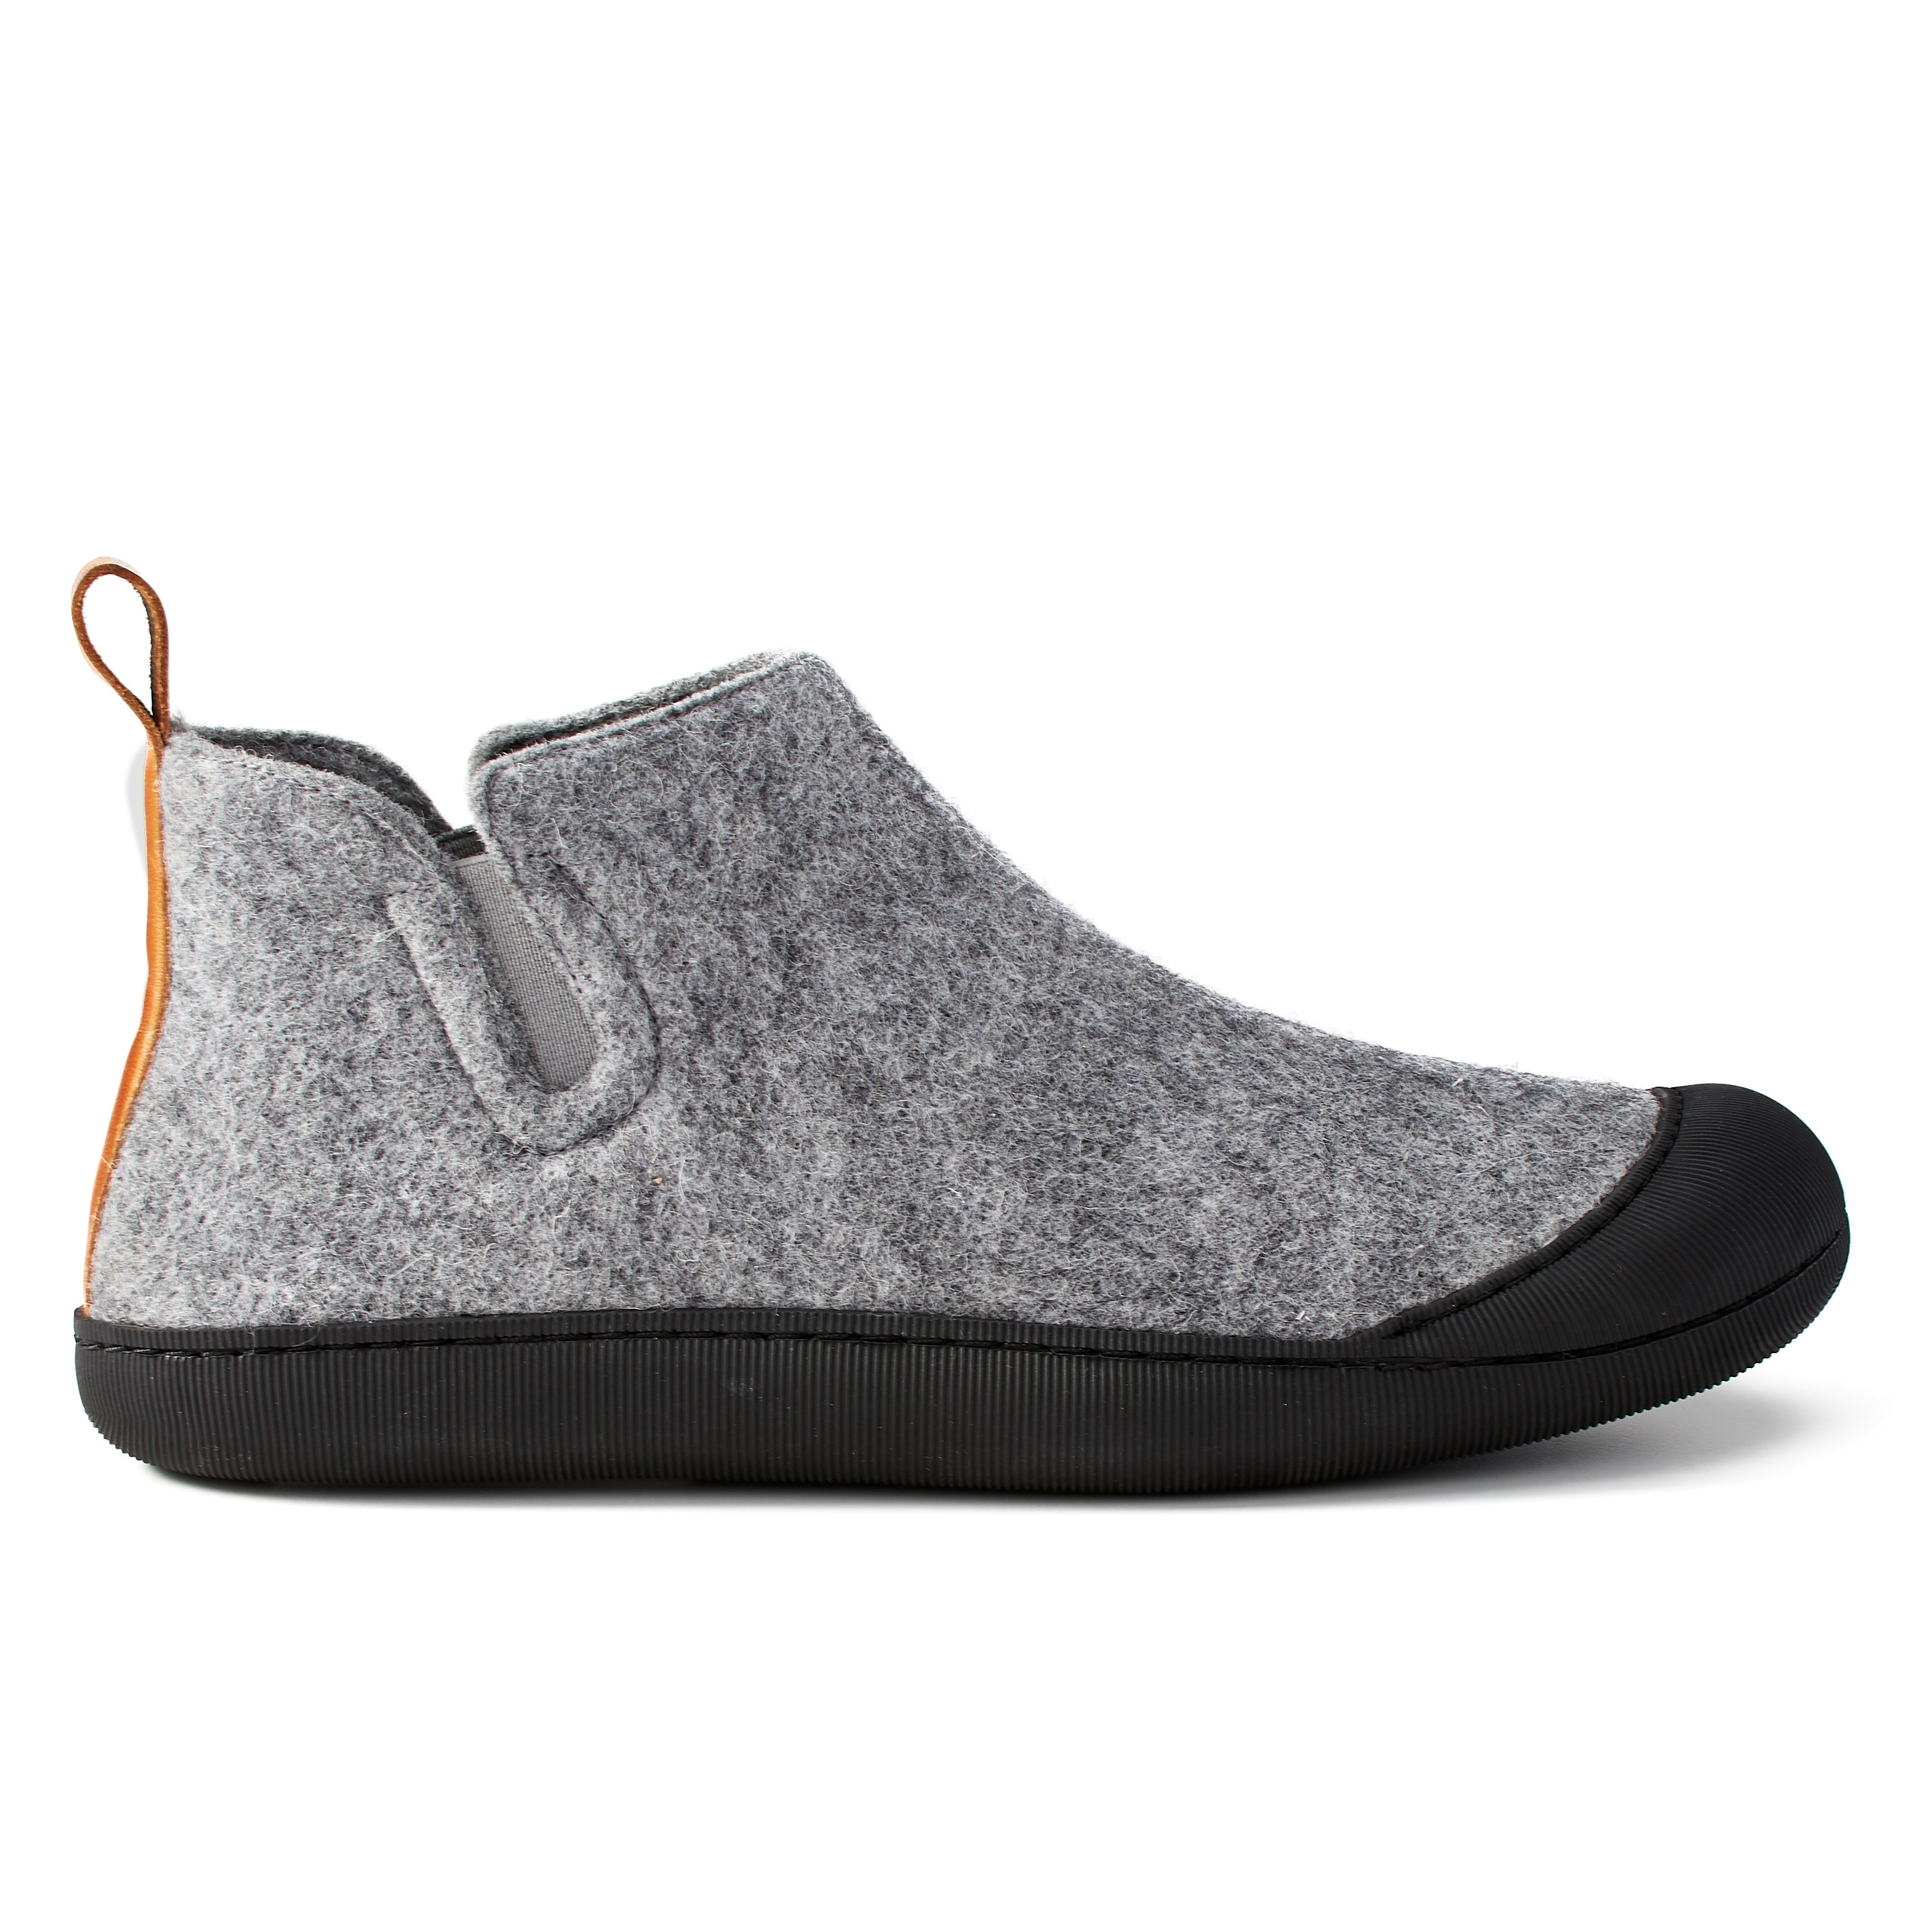 Th8M7MZPa9 greys the outdoor slipper boot for her 0 original